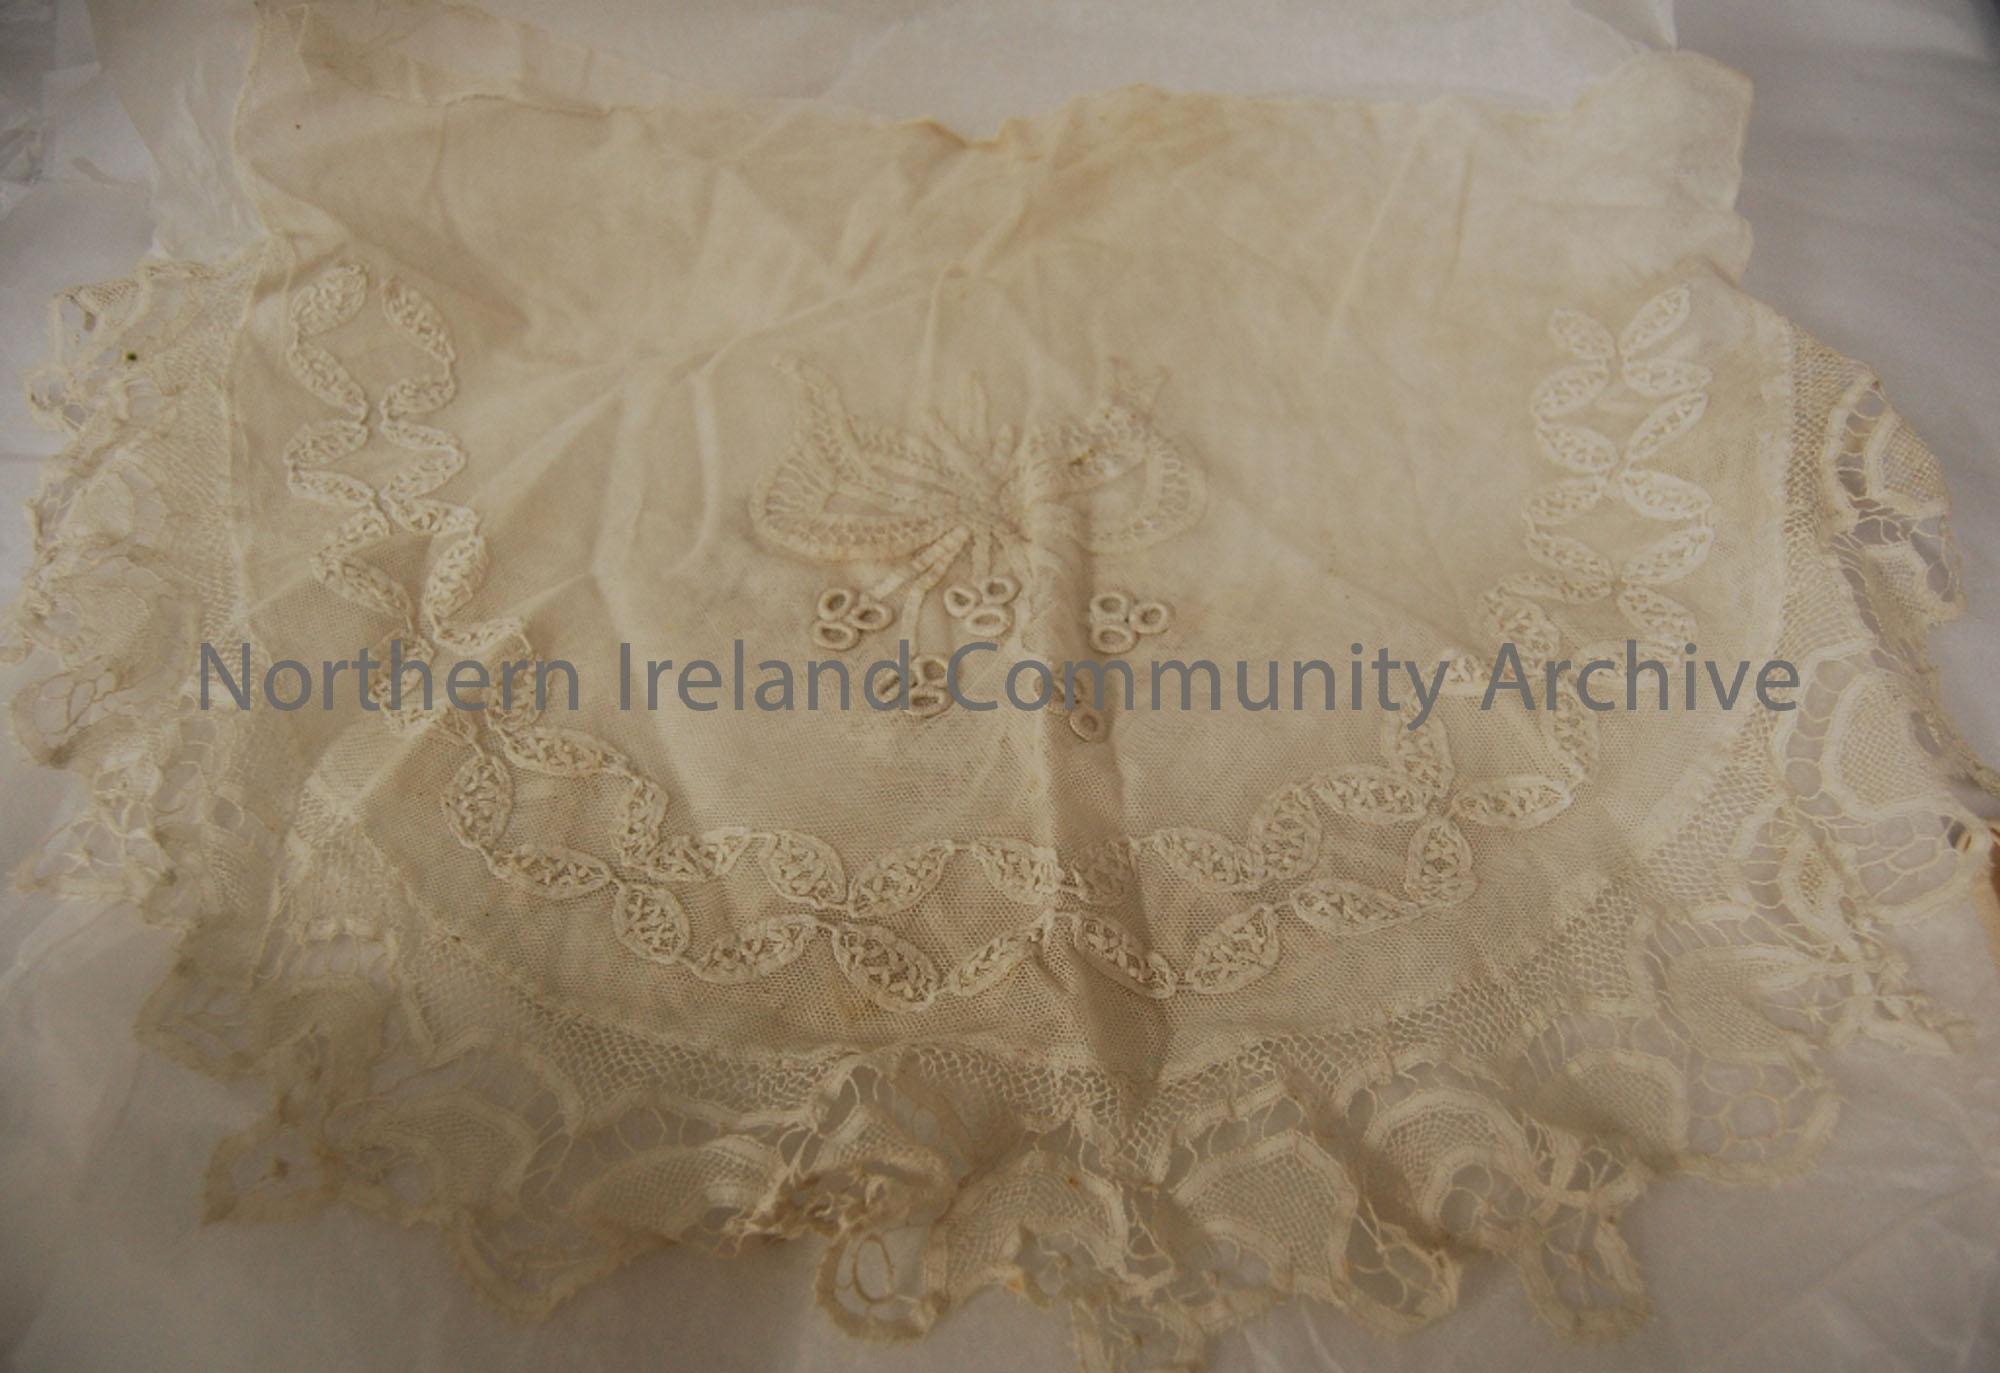 White lacework stiched on both sides with a leaf and bow pattern. It’s a semi circle shape and has frilled edges.